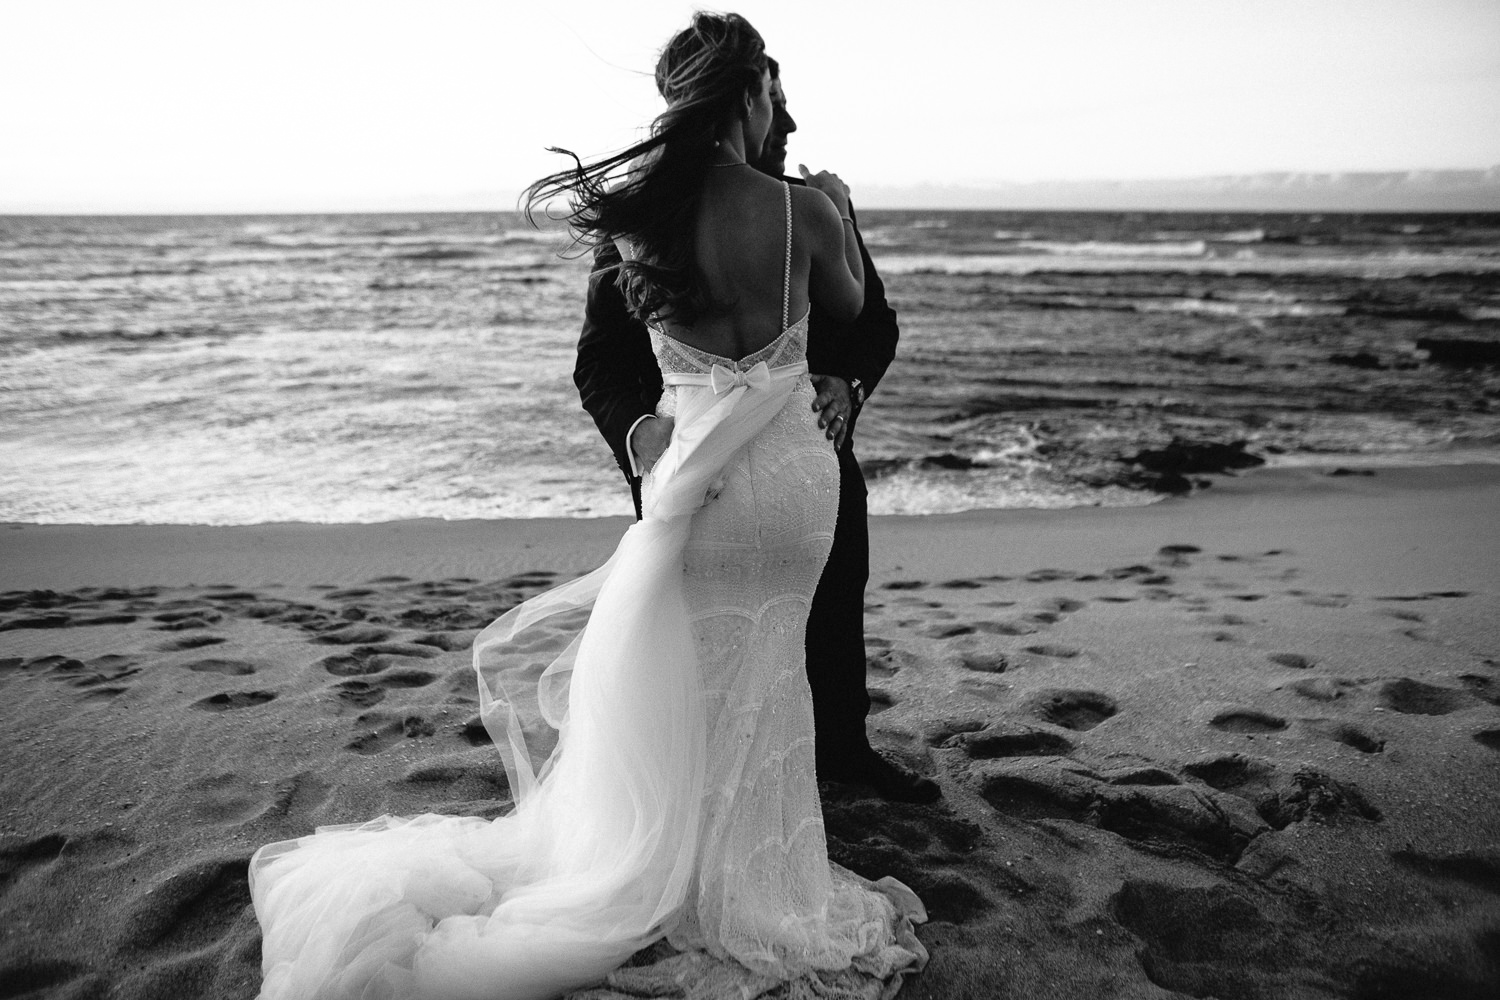 ust married at the Four Seasons Hualalai by Big Island wedding photographer Callaway Gable